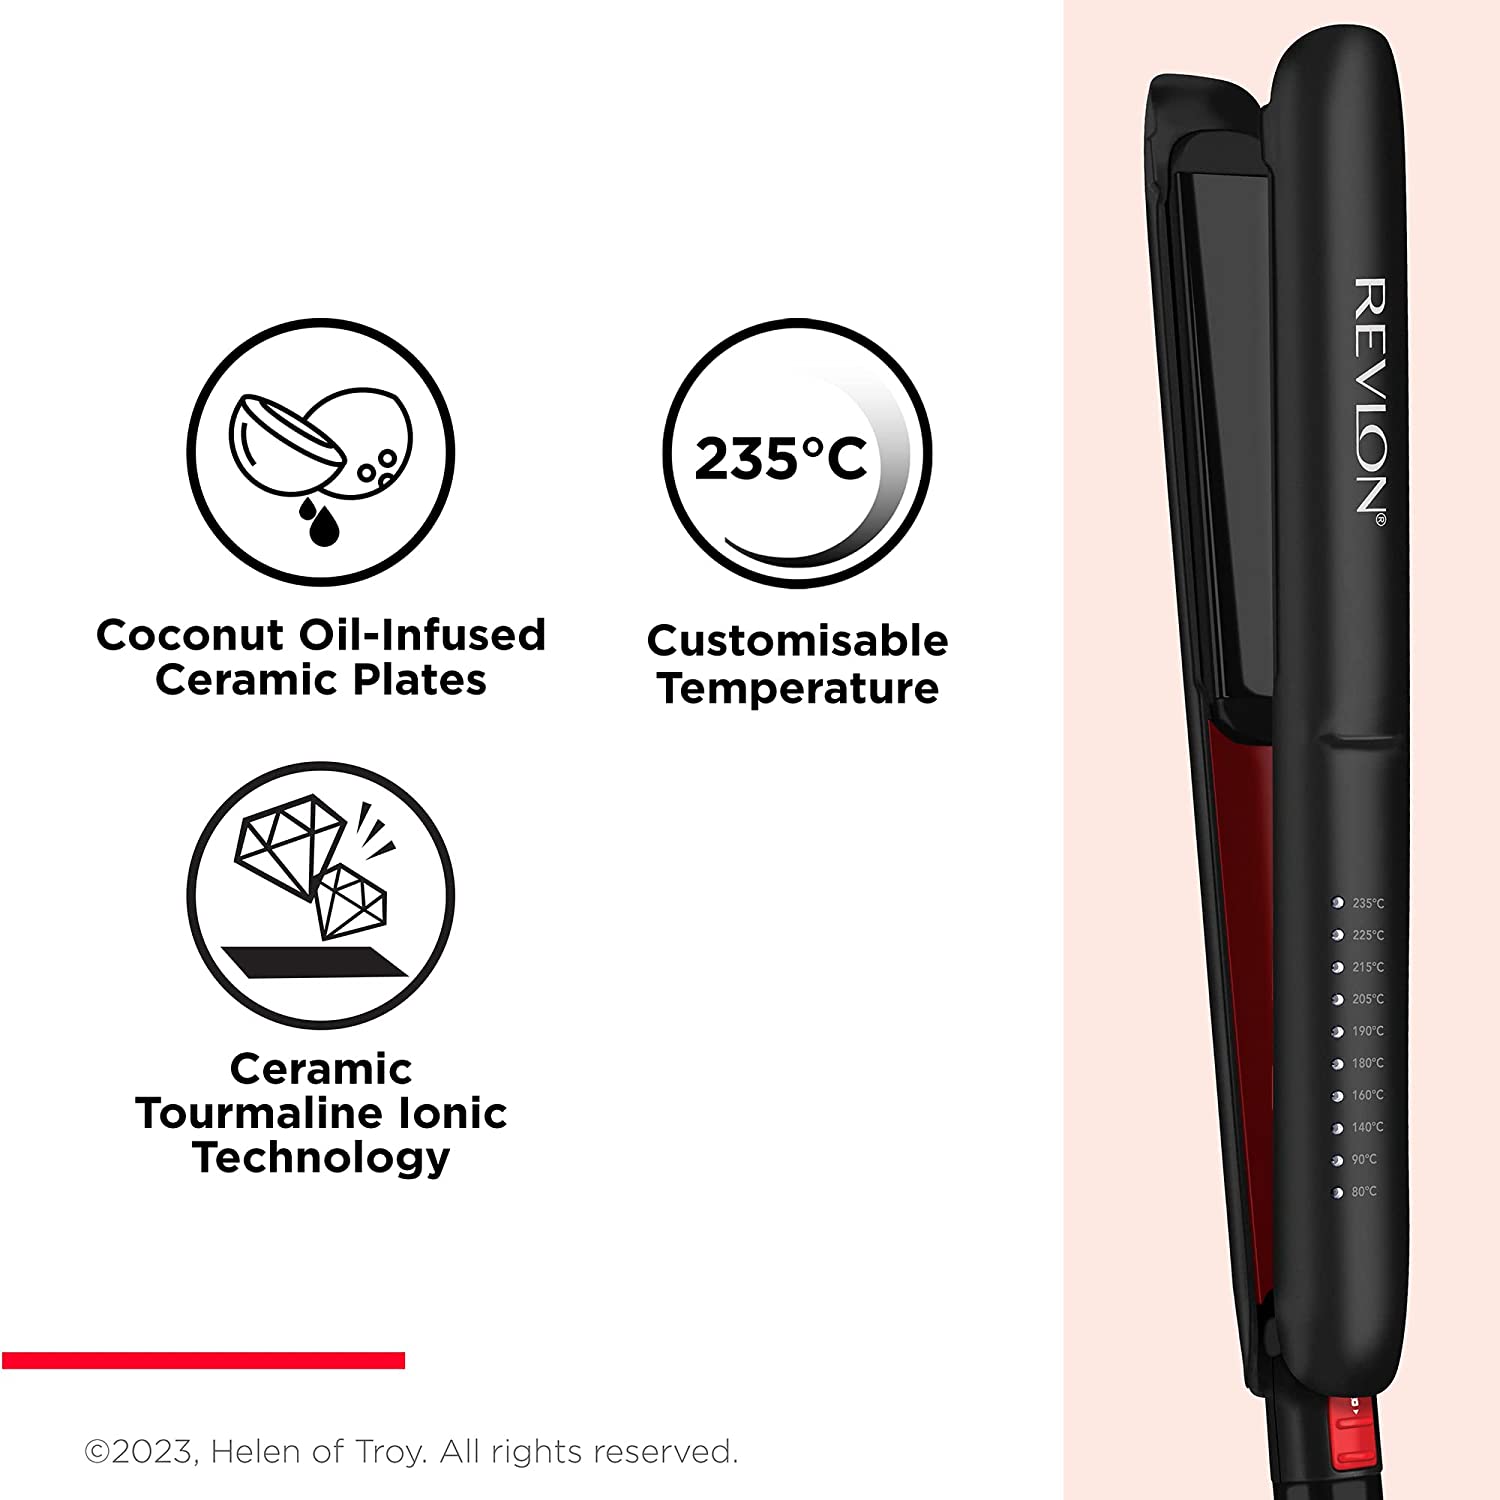 Revlon Smoothstay Coconut Oil-Infused Hair Straightener 25mm Plates Temperature up to 235°C,RVST2211P - Healthxpress.ie